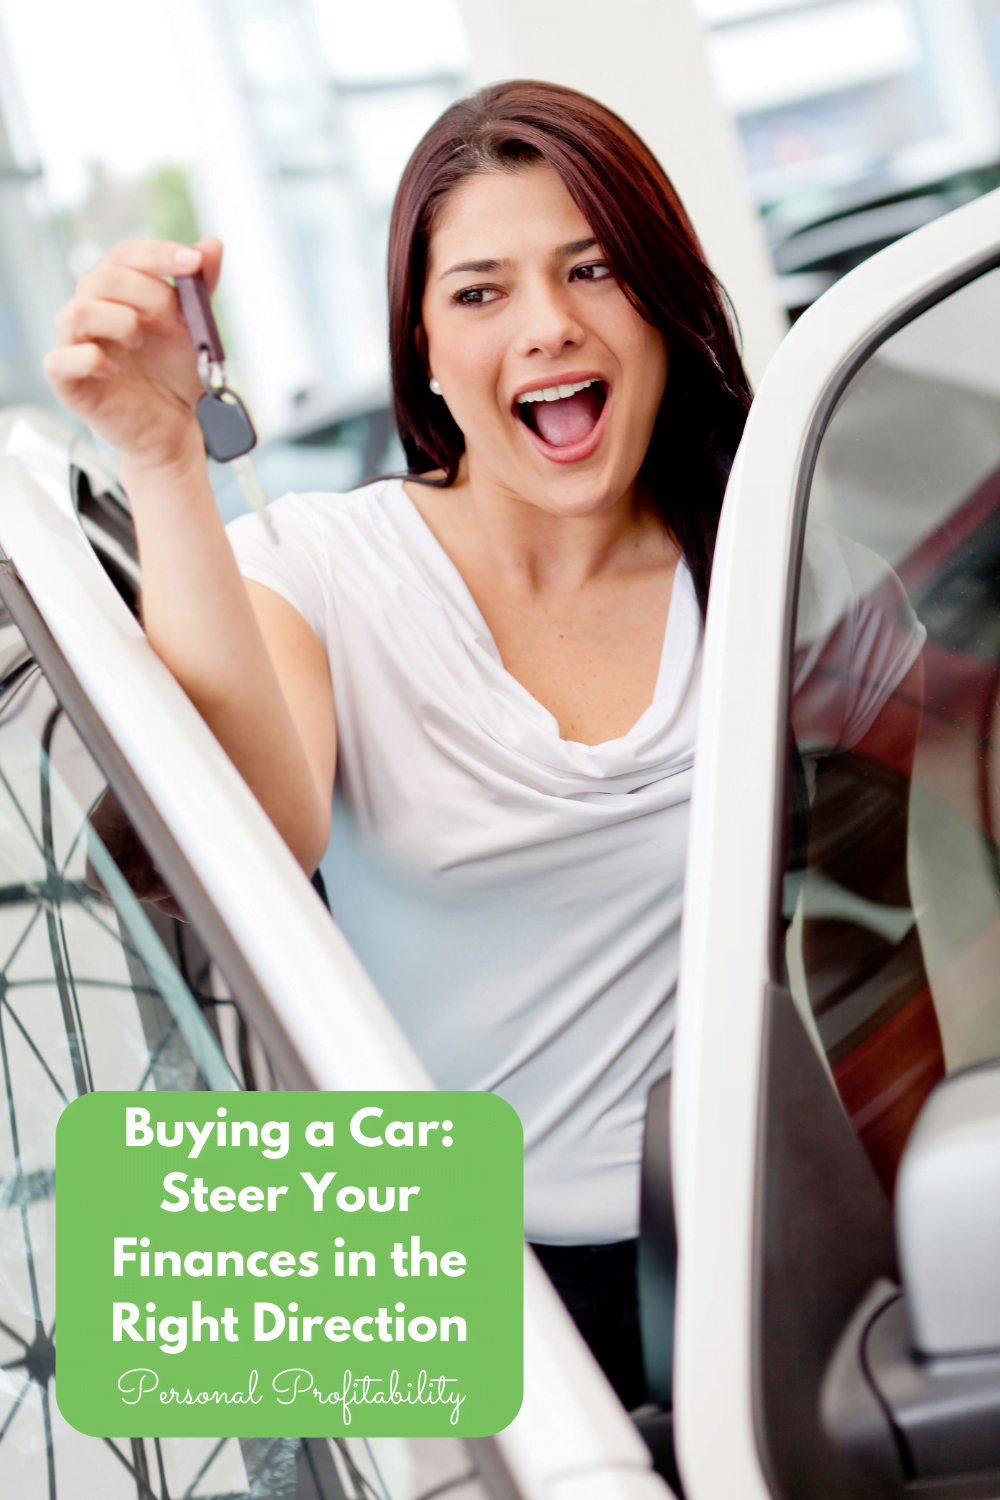 Buying a Car: Steer Your Finances in the Right Direction